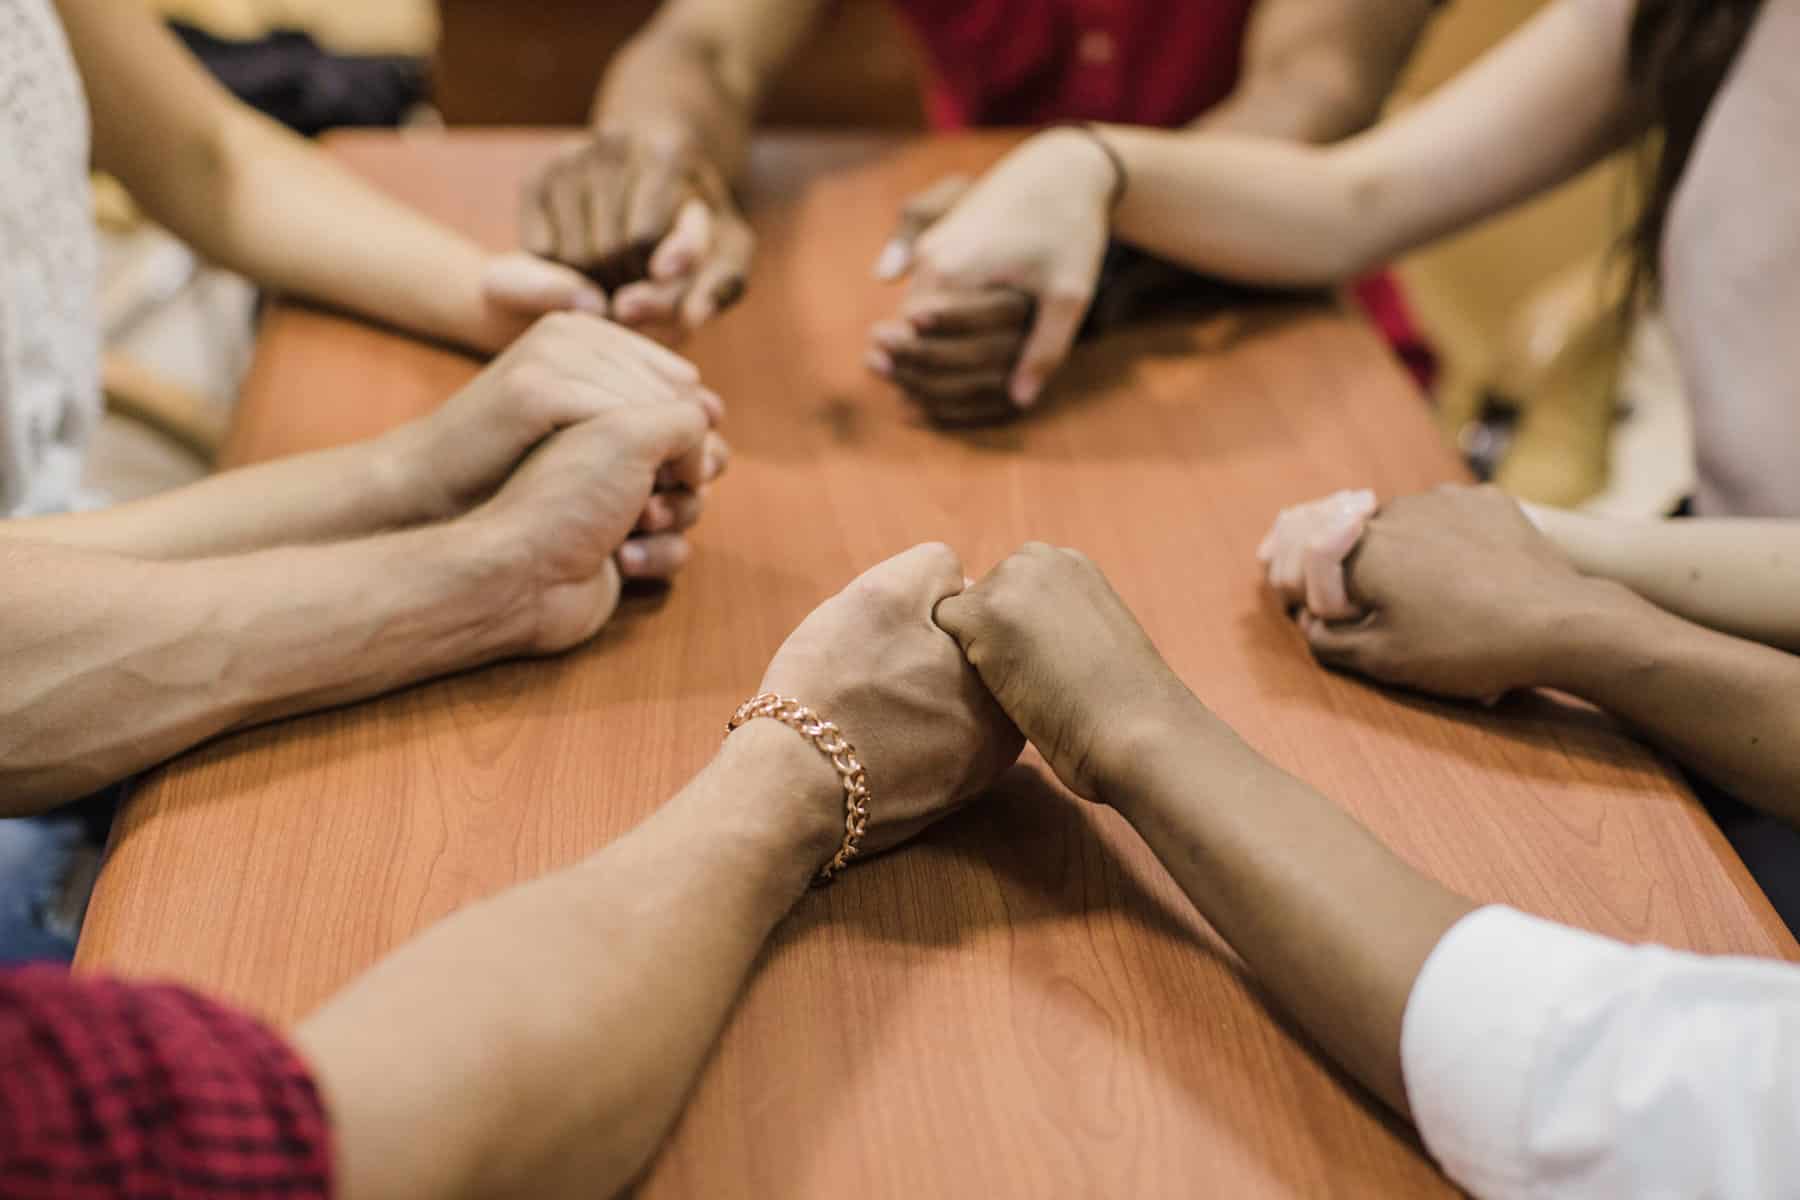 The arms of several people are shown around a small table holding the hands of their neighbors.